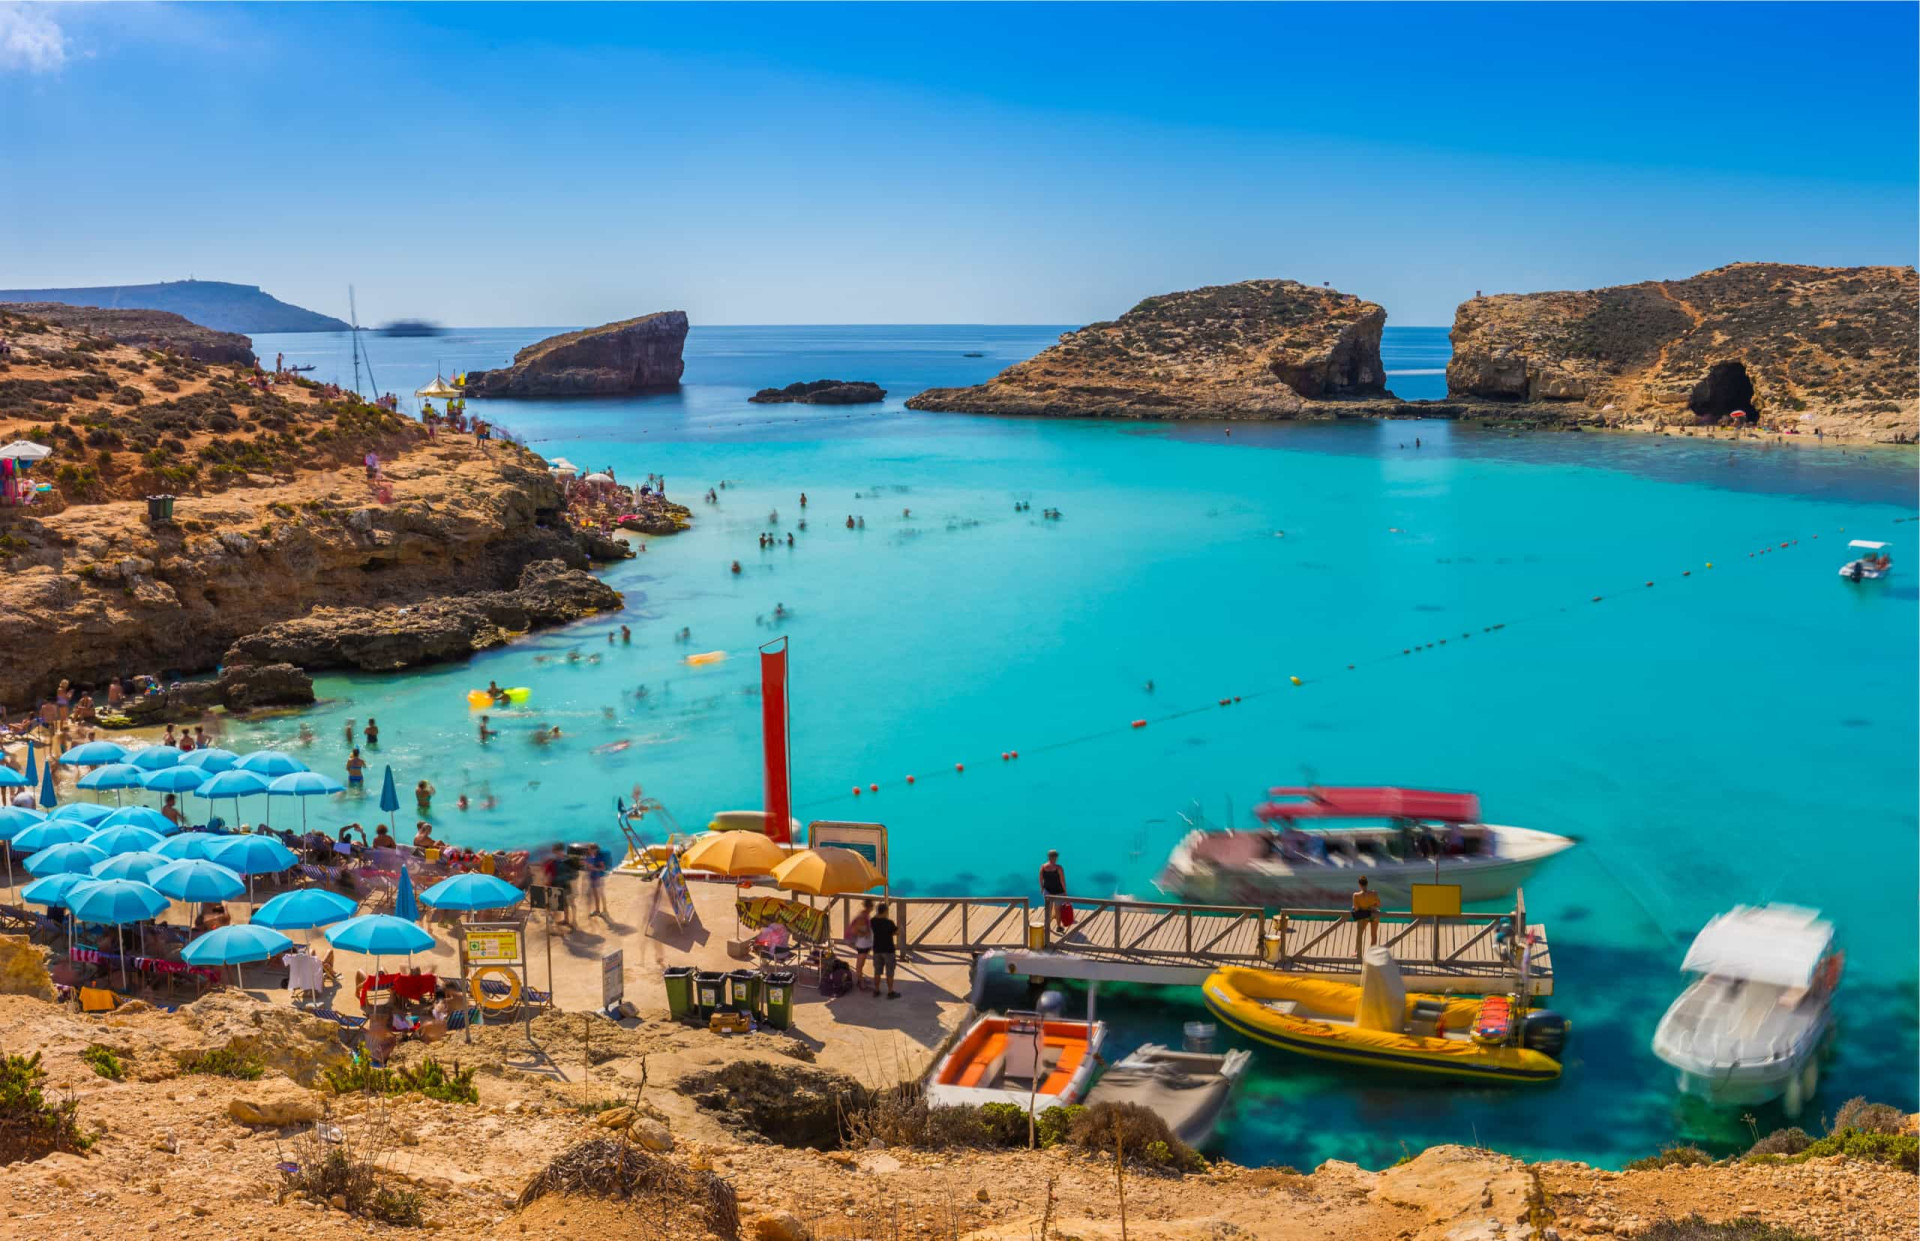 This small bay with shallow, stunningly blue water can be enjoyed on the west coast of sister island Comino. It's one of the most spectacular sights of the Maltese archipelago.<p>You may also like:<a href="https://www.starsinsider.com/n/363050?utm_source=msn.com&utm_medium=display&utm_campaign=referral_description&utm_content=397154v6en-us"> Taylor Swift and other stinky stars with bad personal hygiene</a></p>